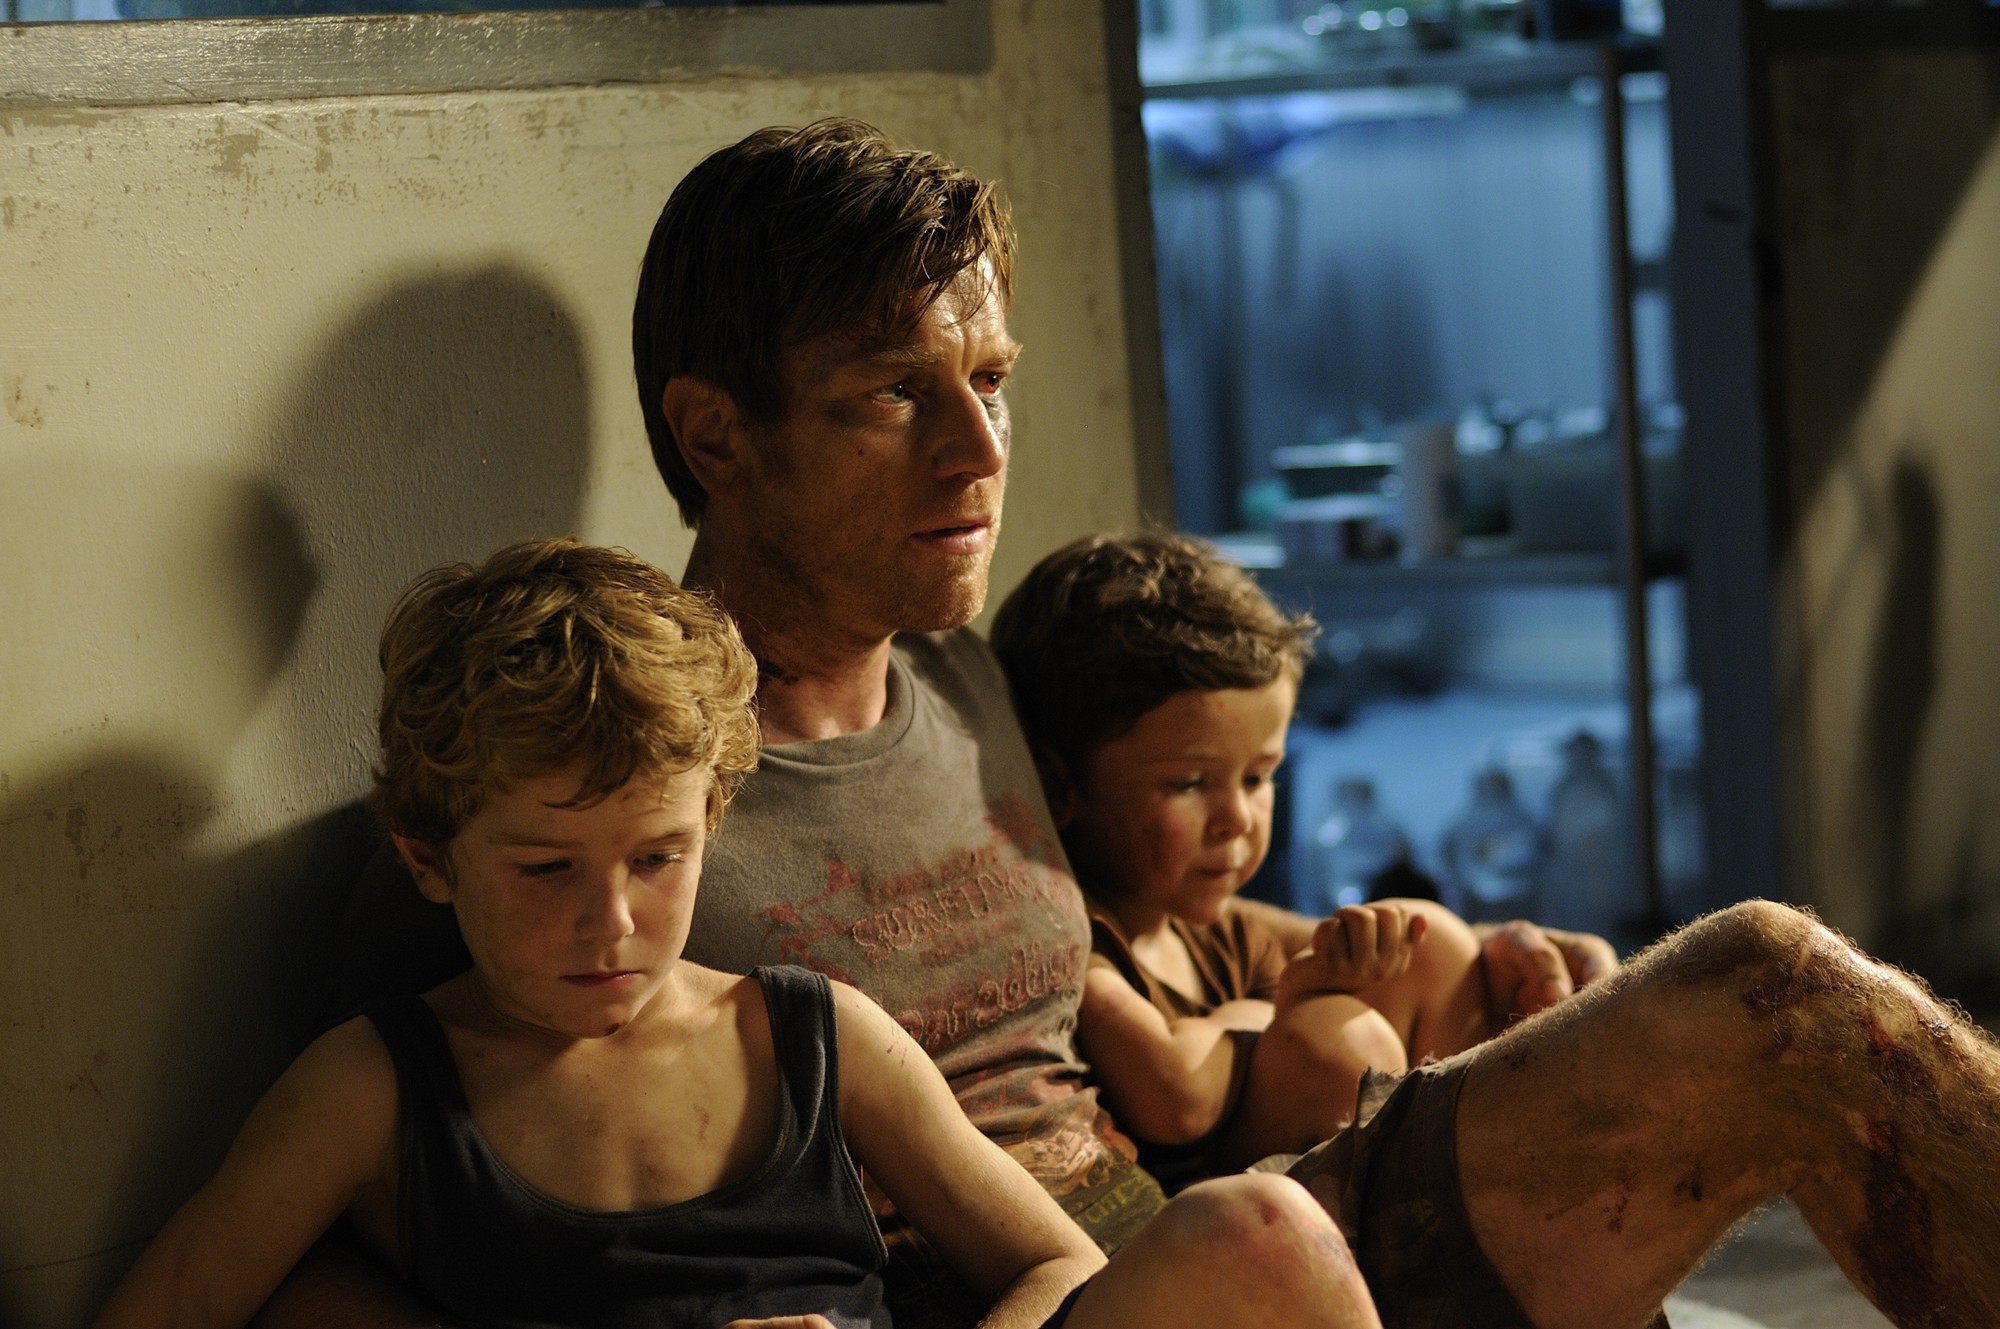 Tom Holland, Ewan McGregor and Oaklee Pendergast in Summit Entertainment's The Impossible (2012)